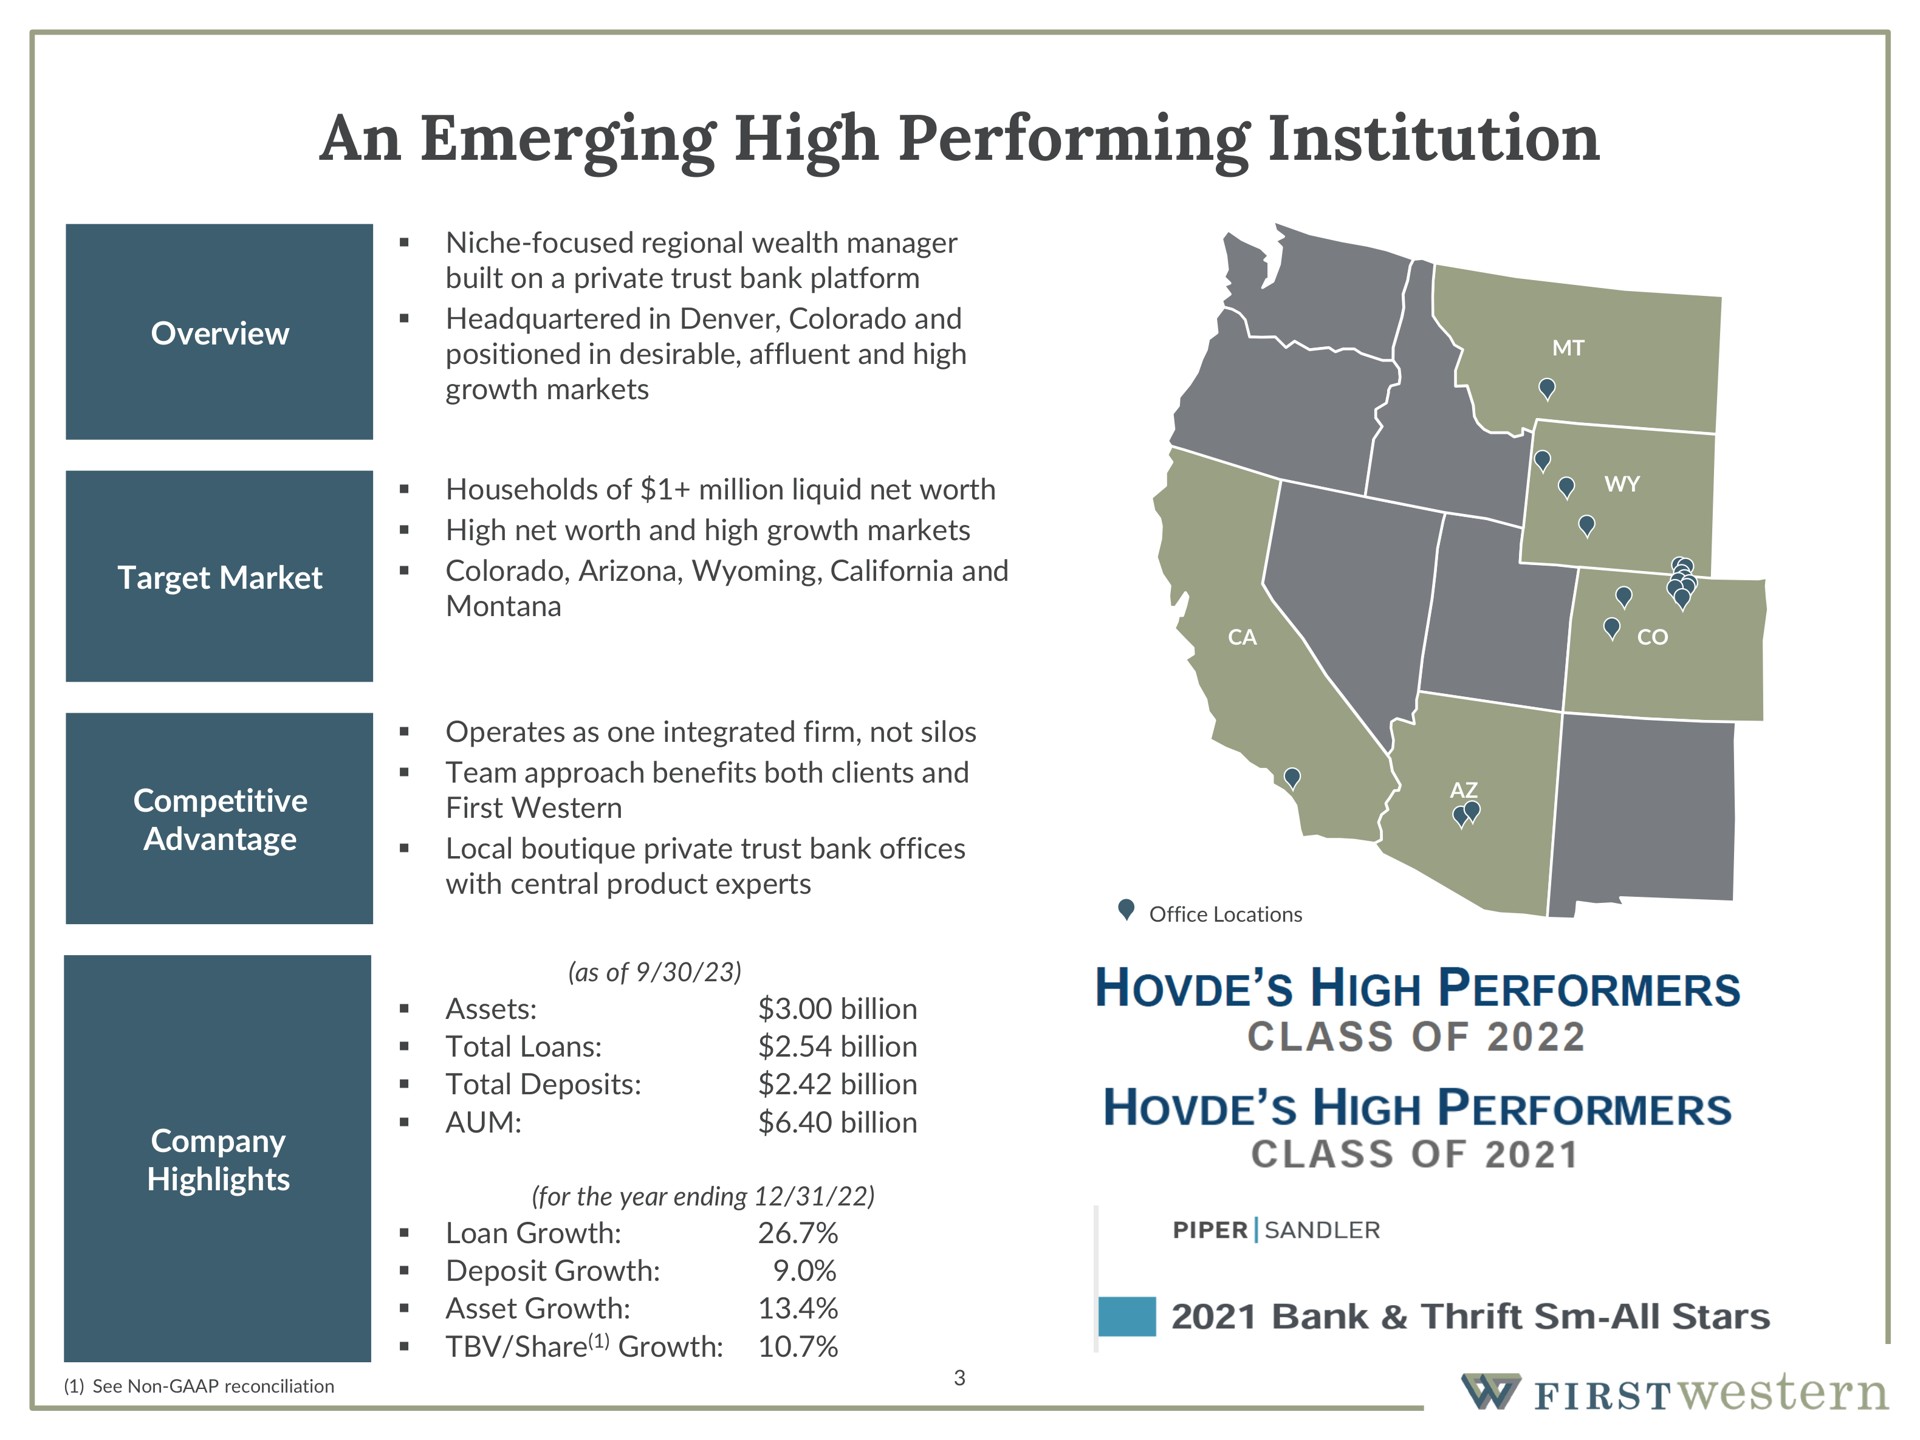 an emerging high performing institution | First Western Financial